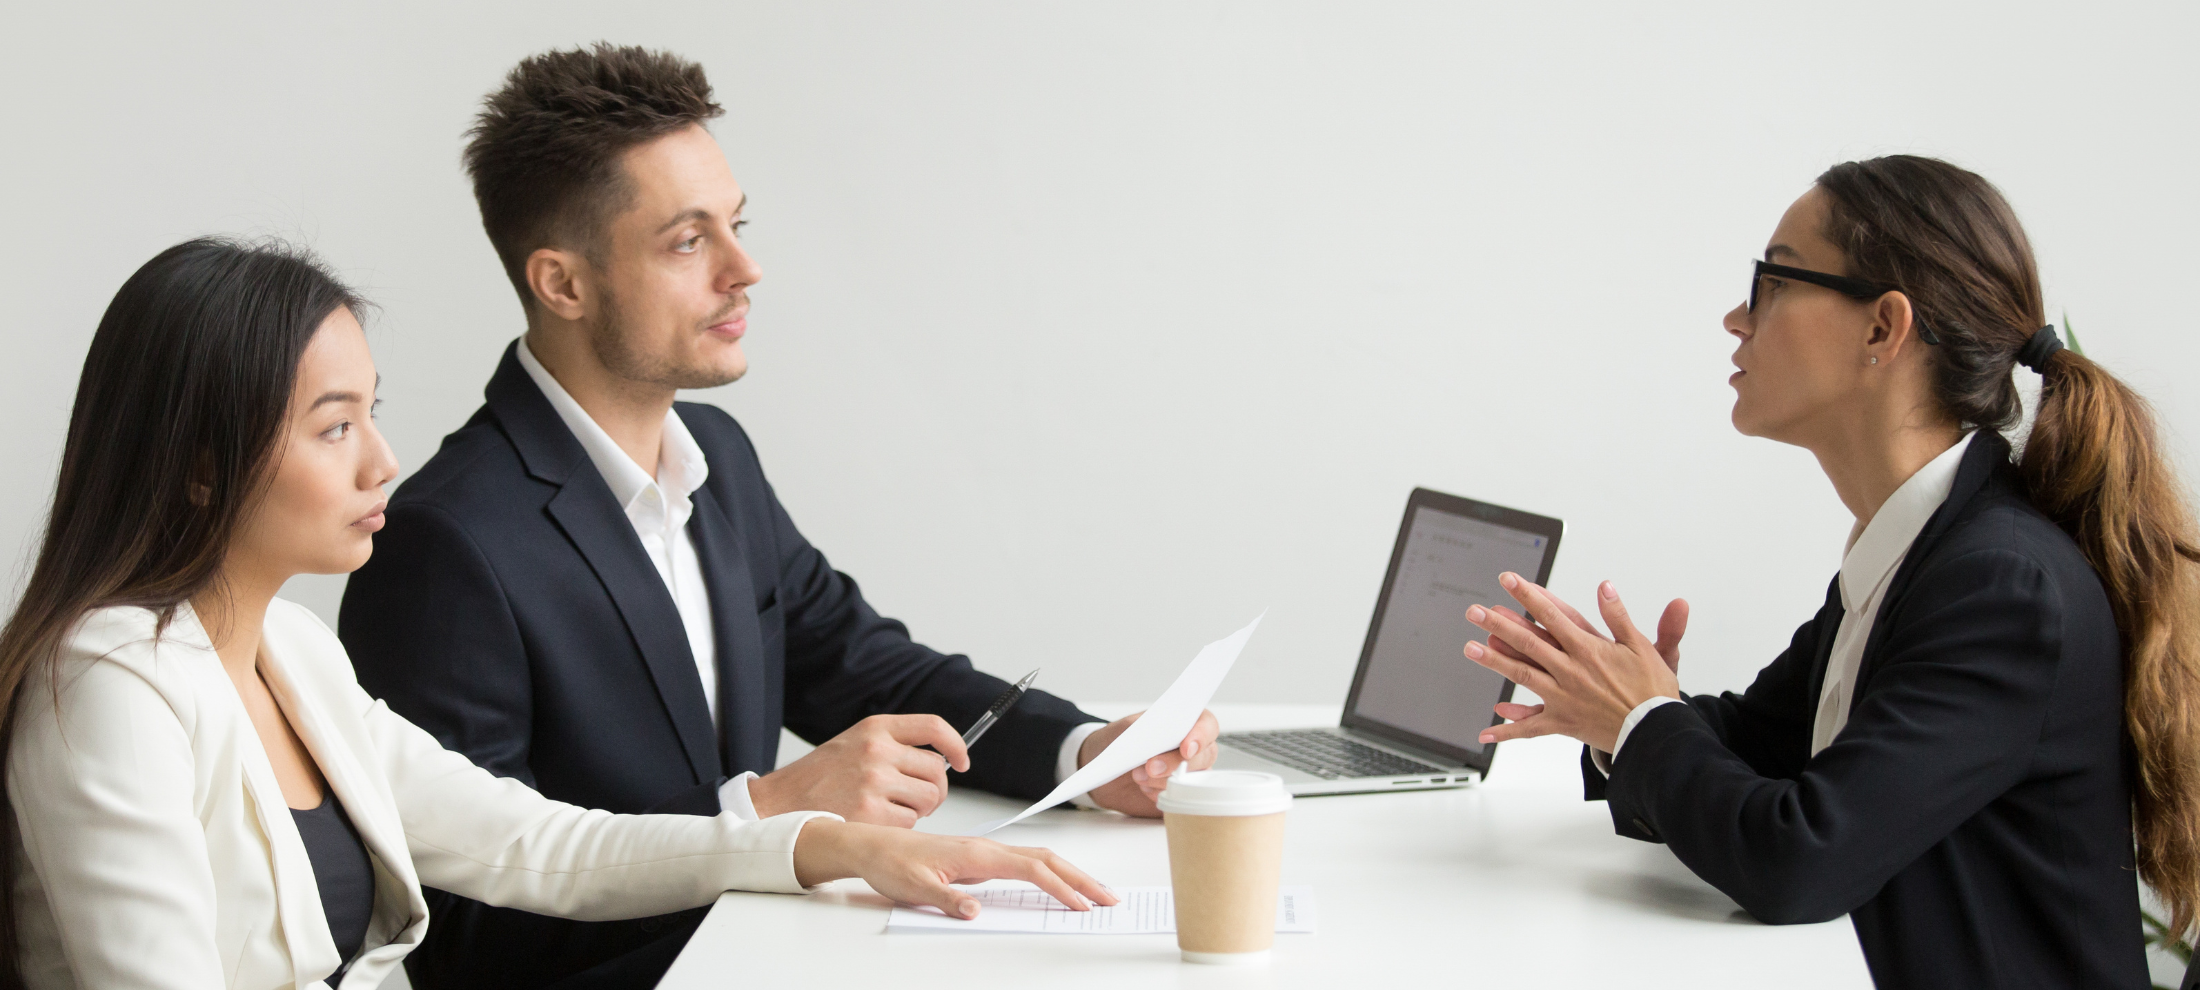 A recruiter asking Strategic Interview Questions